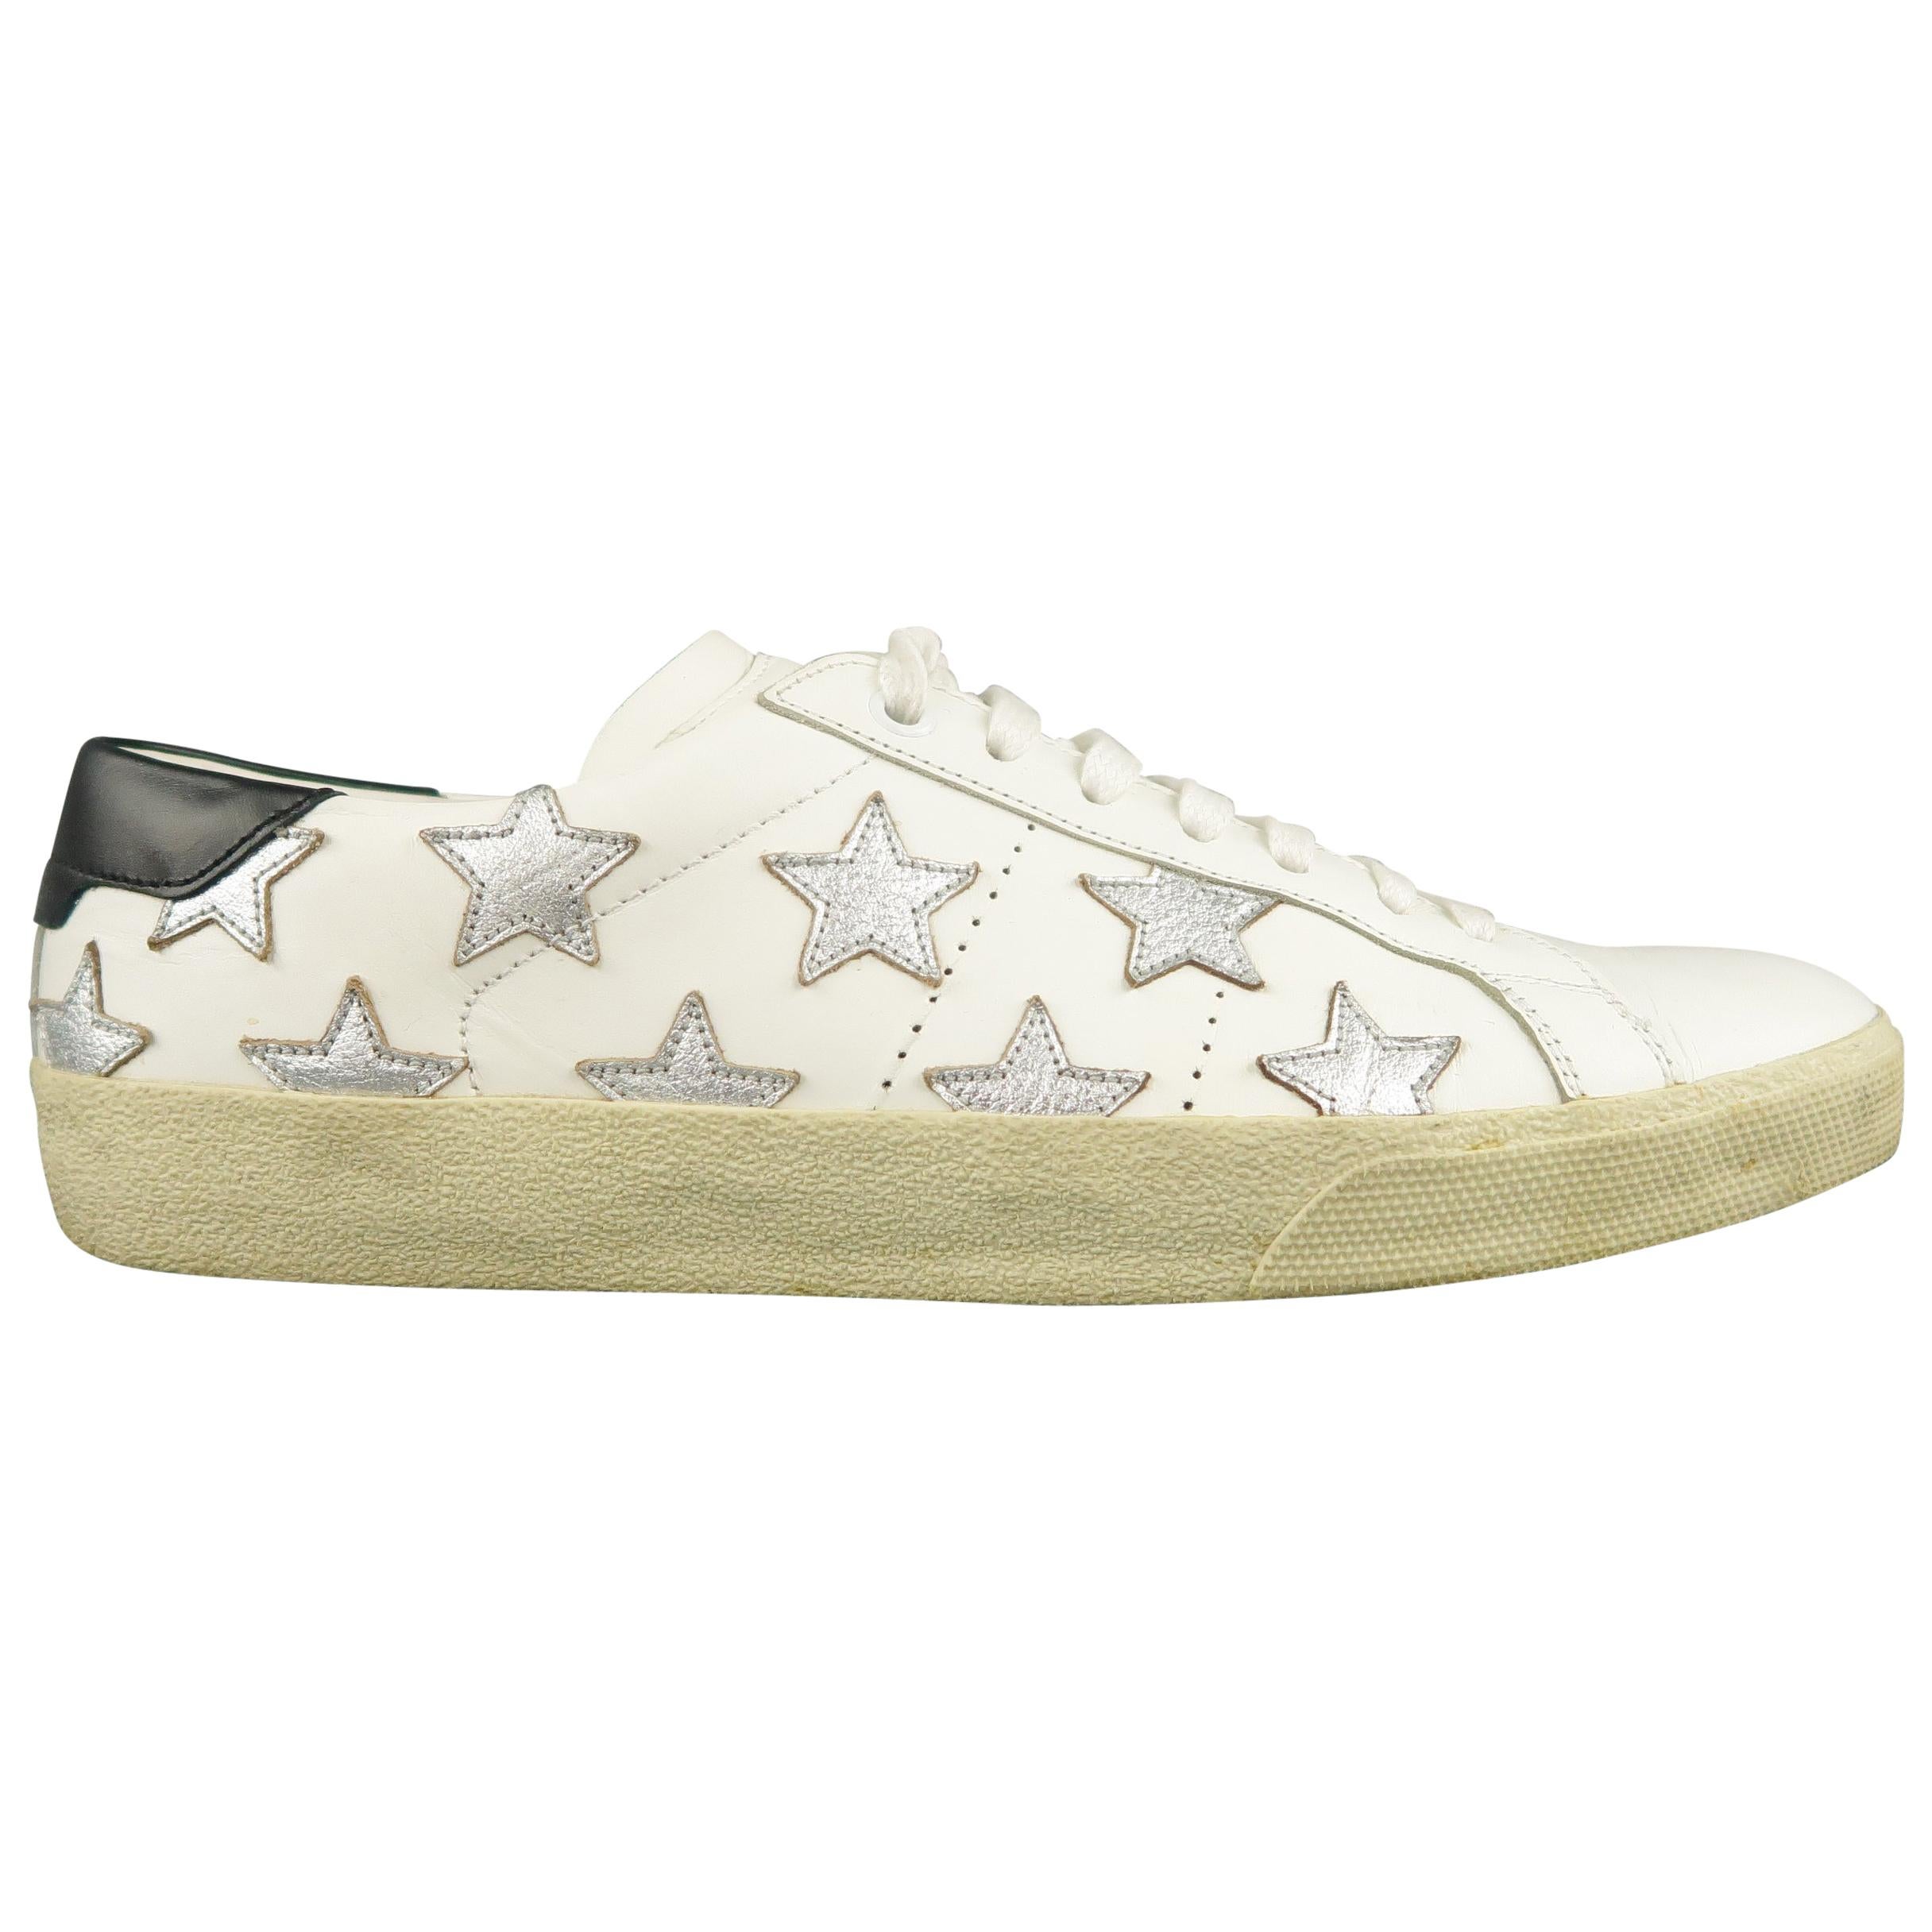 SAINT LAURENT Size 7 White Leather Silver Stars California SL 06 Sneakers